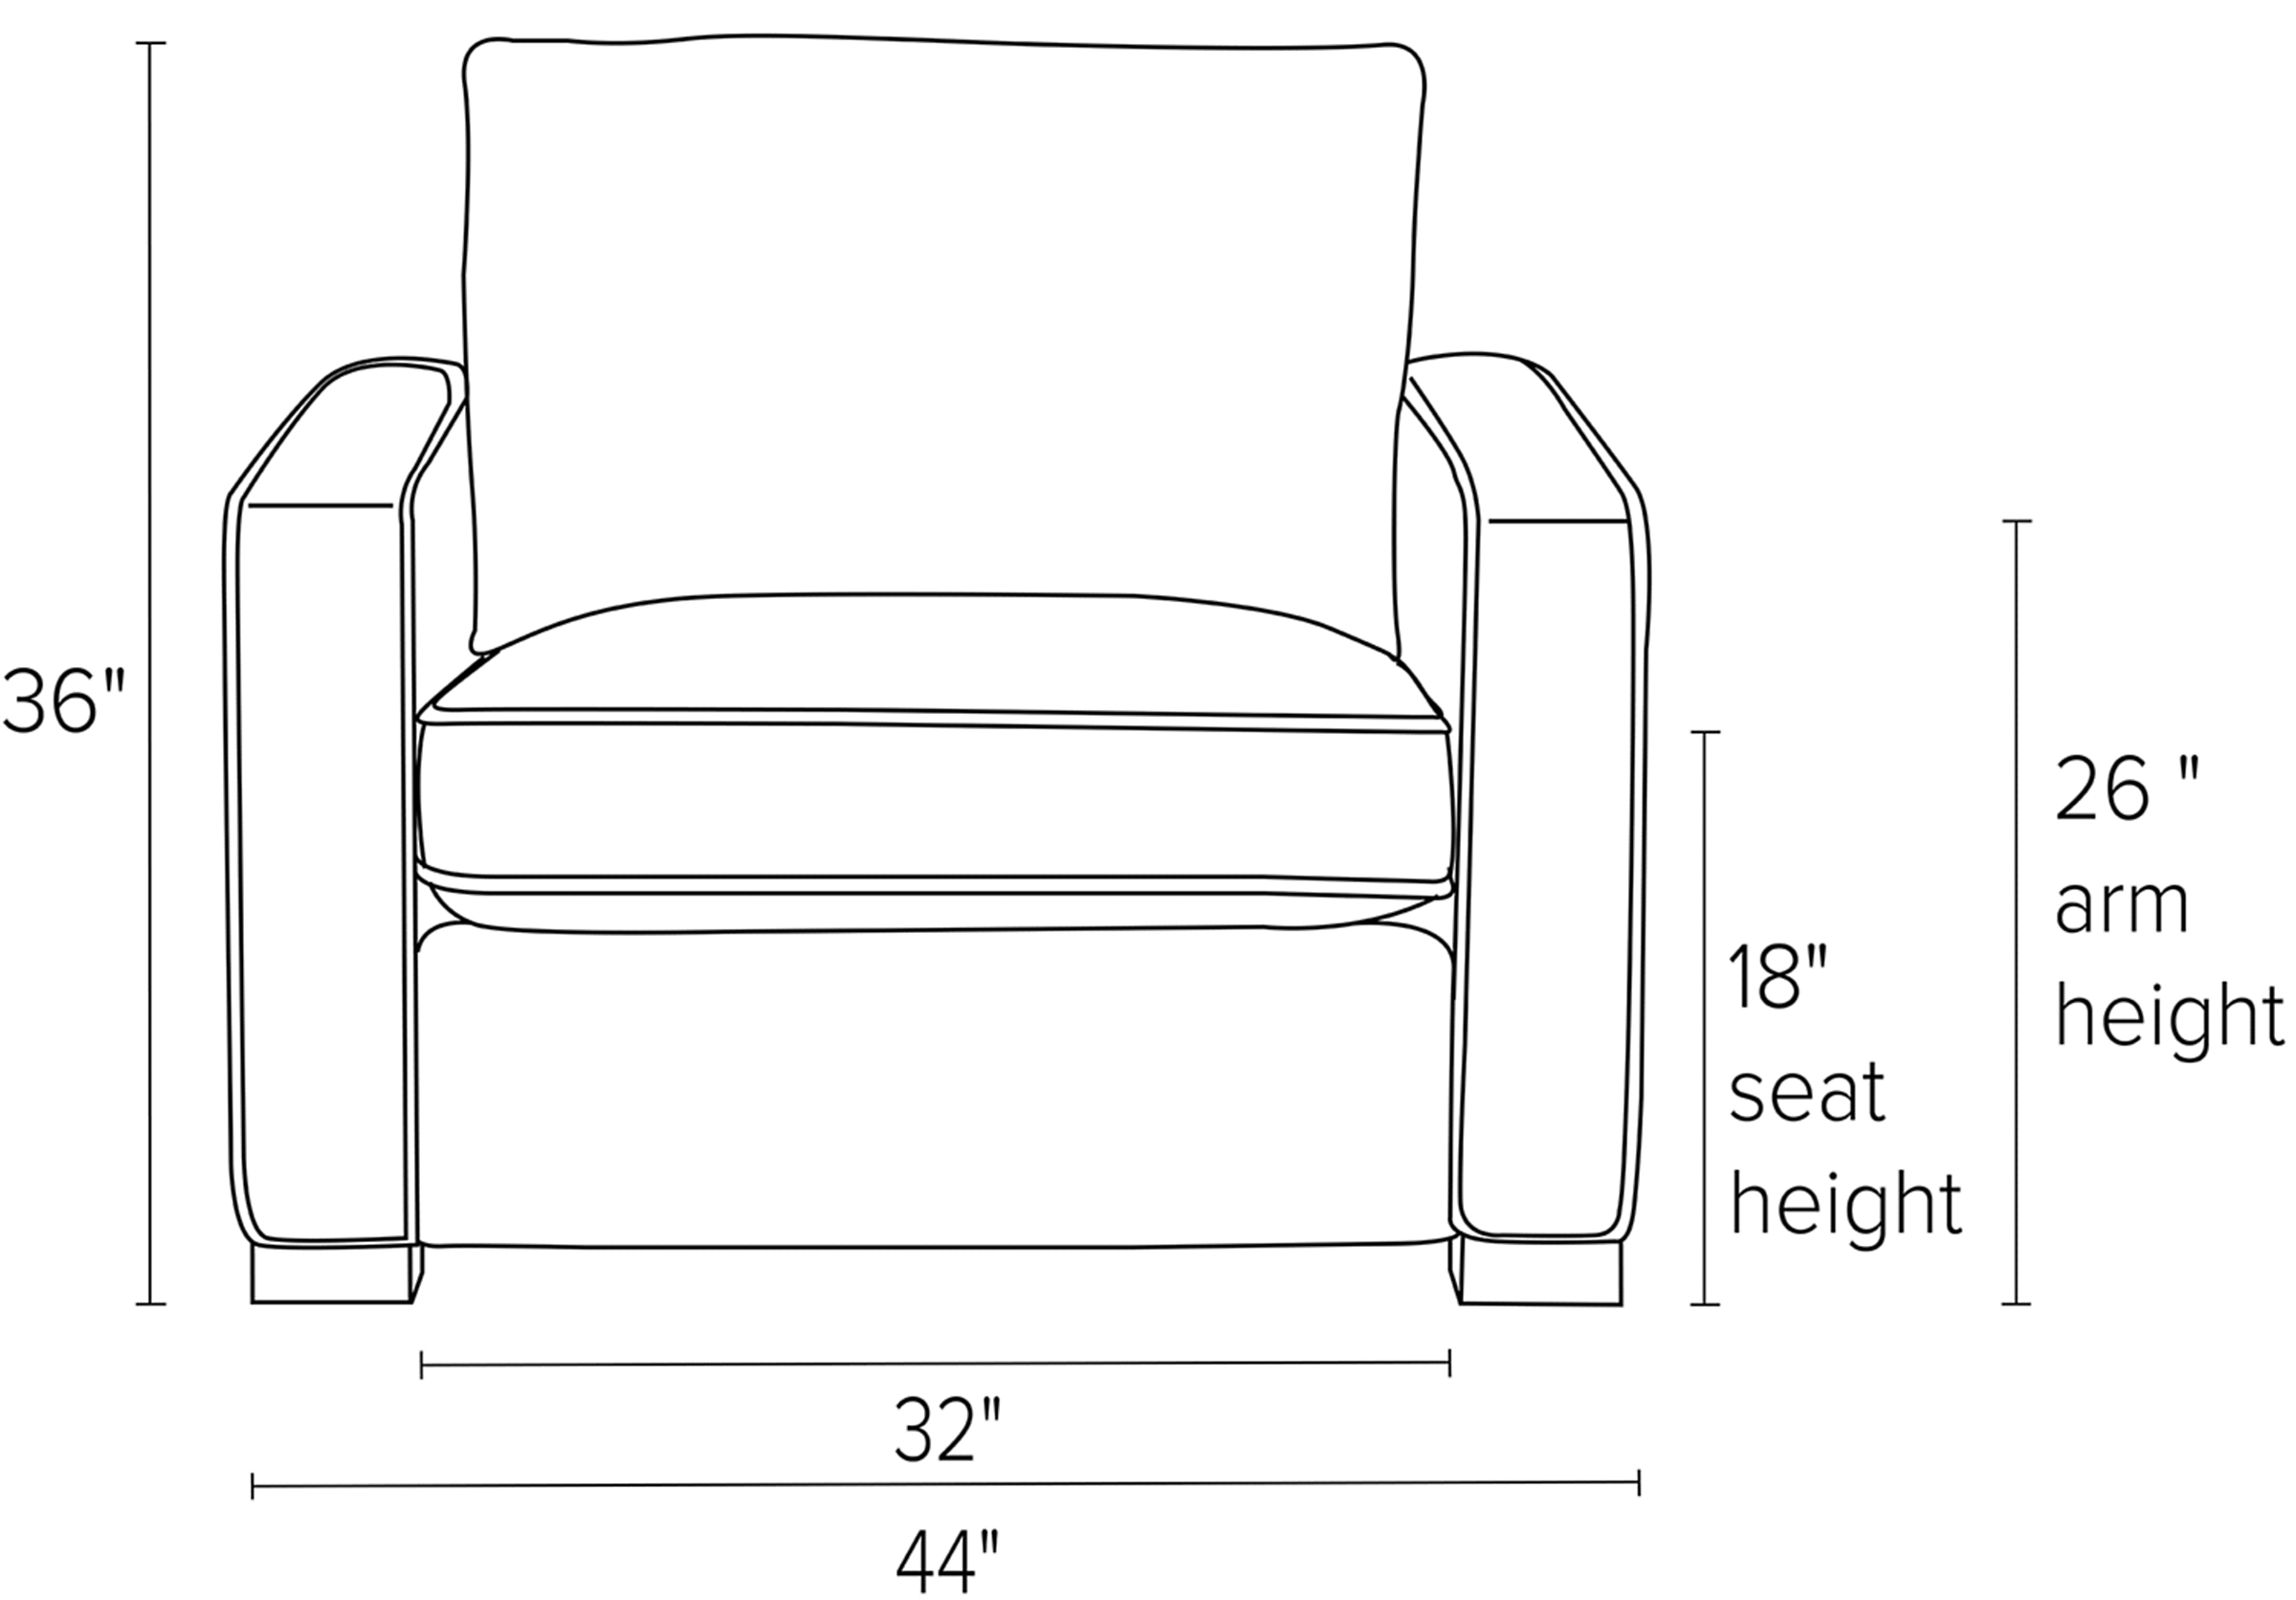 Front view dimension illustration of Morrison chair.